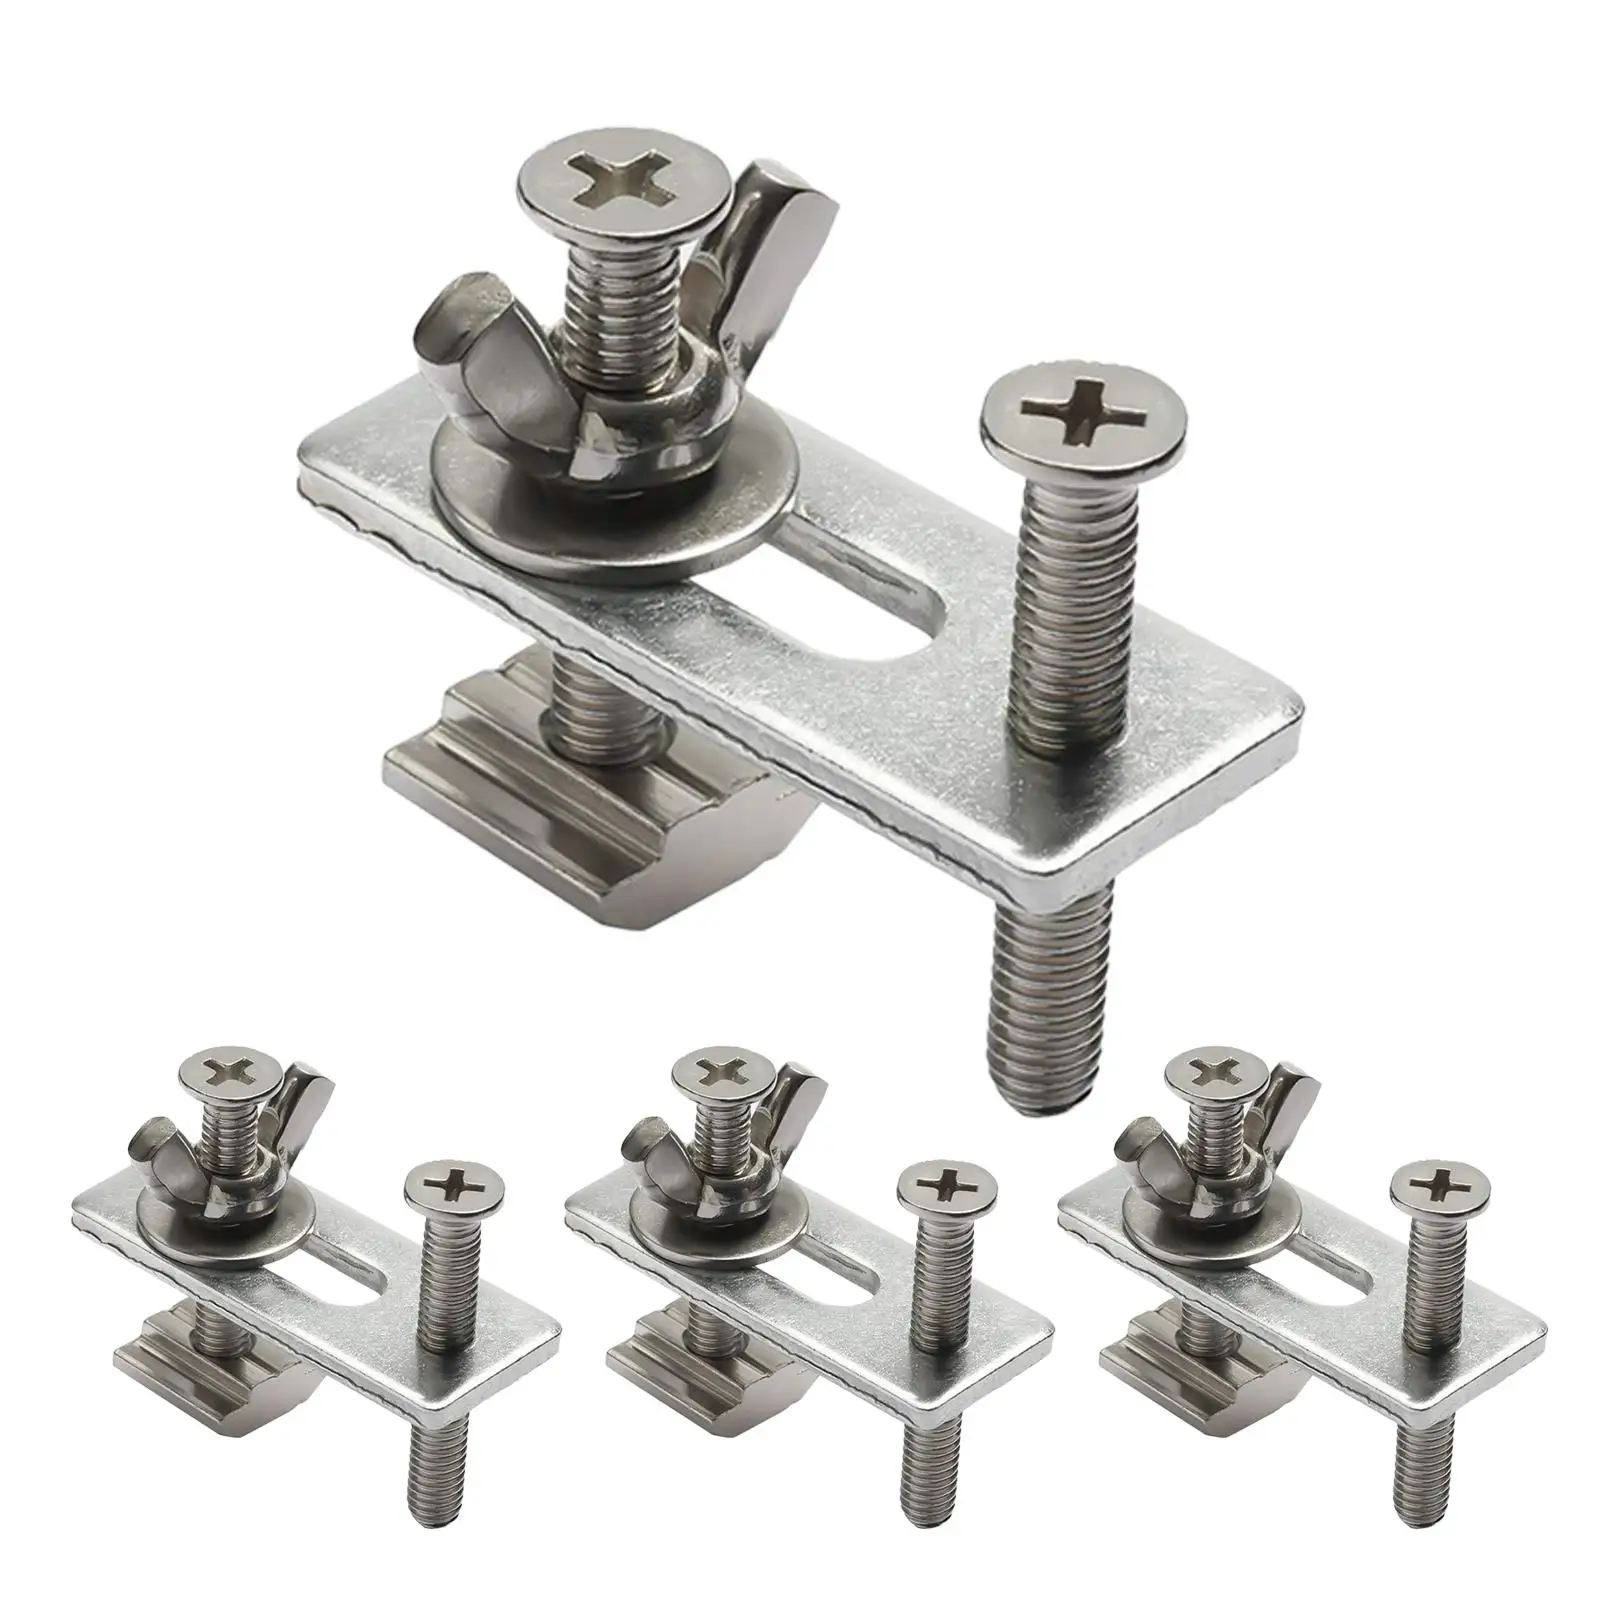 

4Pcs Engraving Machine Press Plate Clamp Professional M6 Hold Down Clamp Sturdy for Routers CNC Vertical Mills